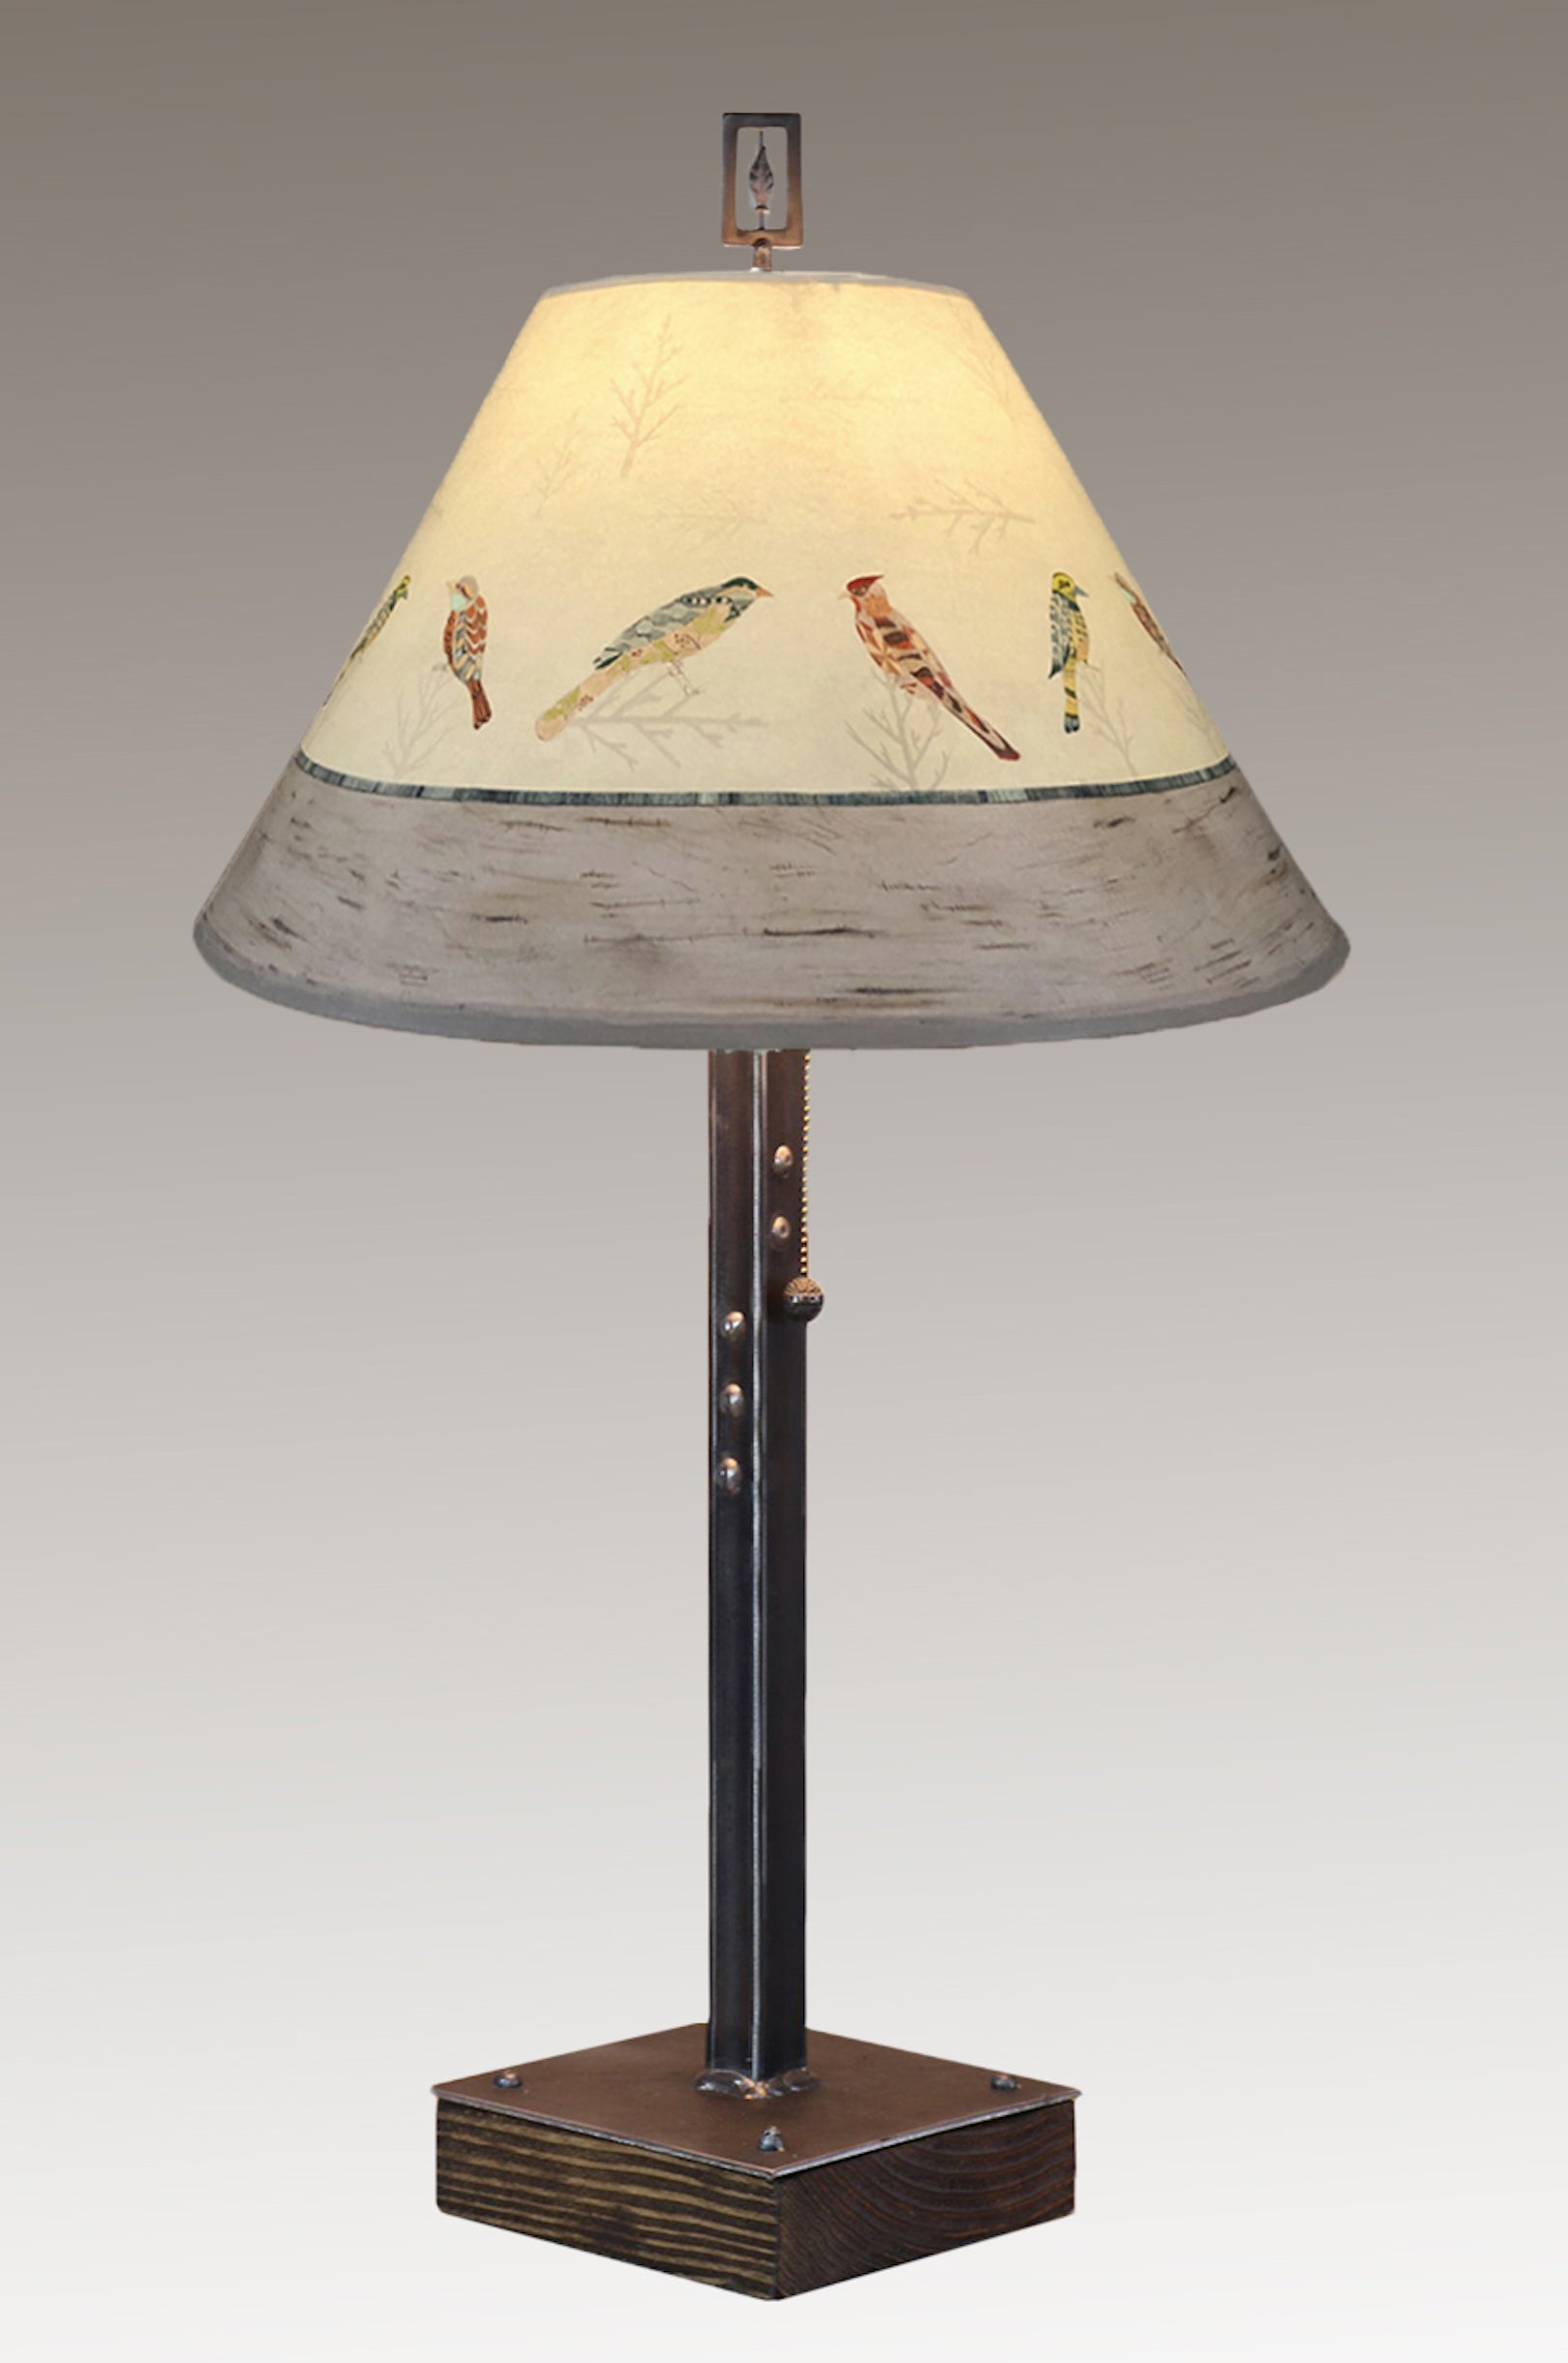 Janna Ugone & Co Table Lamps Steel Table Lamp on Wood with Medium Conical Shade in Bird Friends